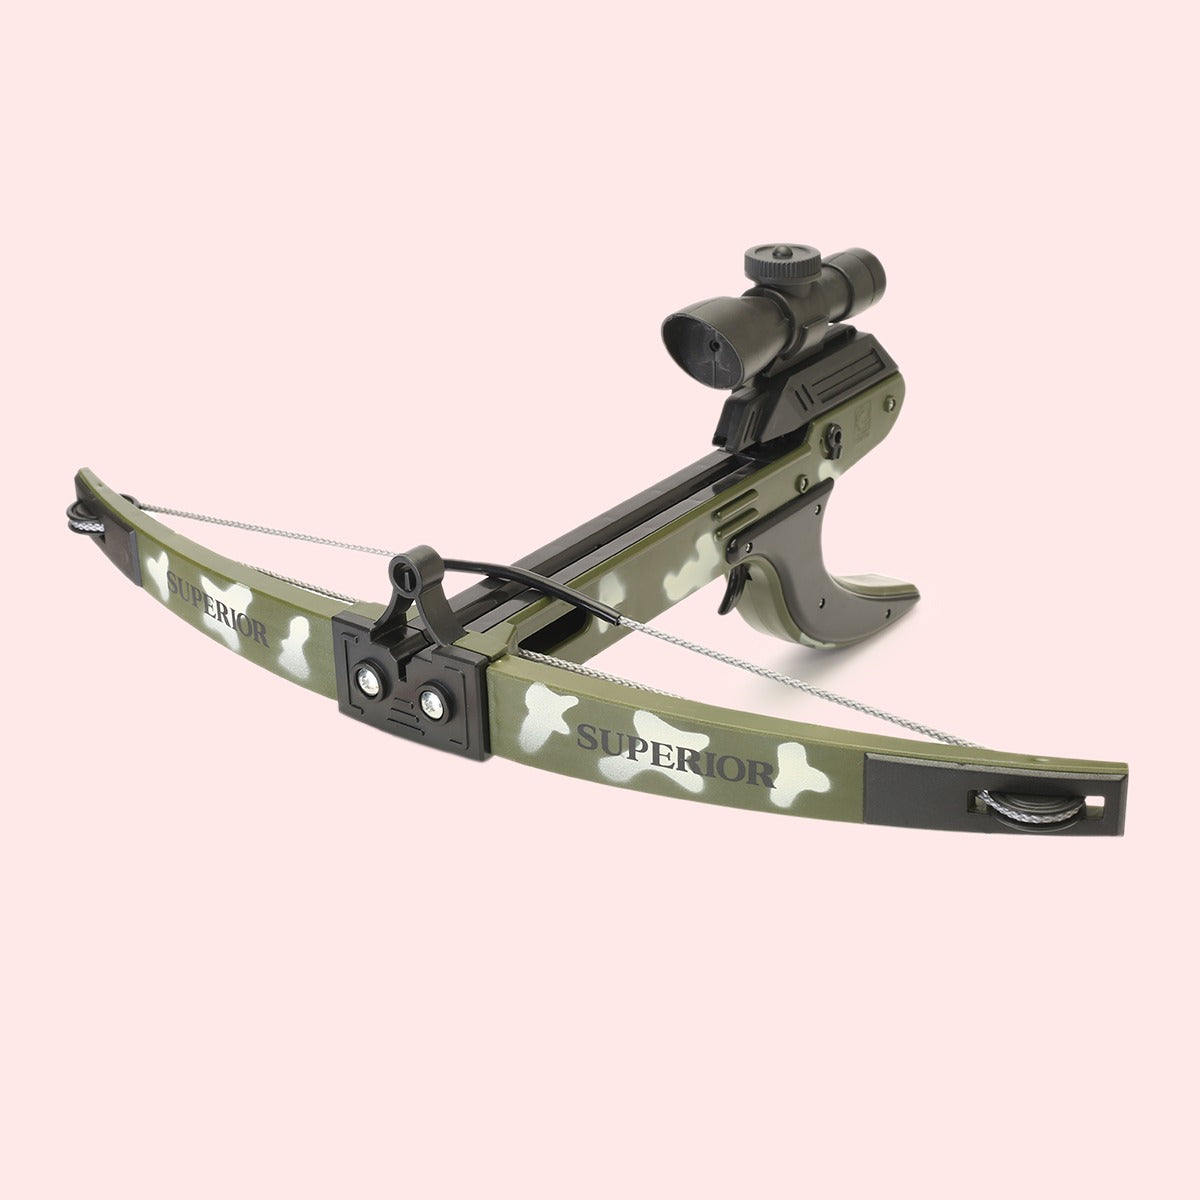 Camouflage Recurve Crossbow with Infrared Scope